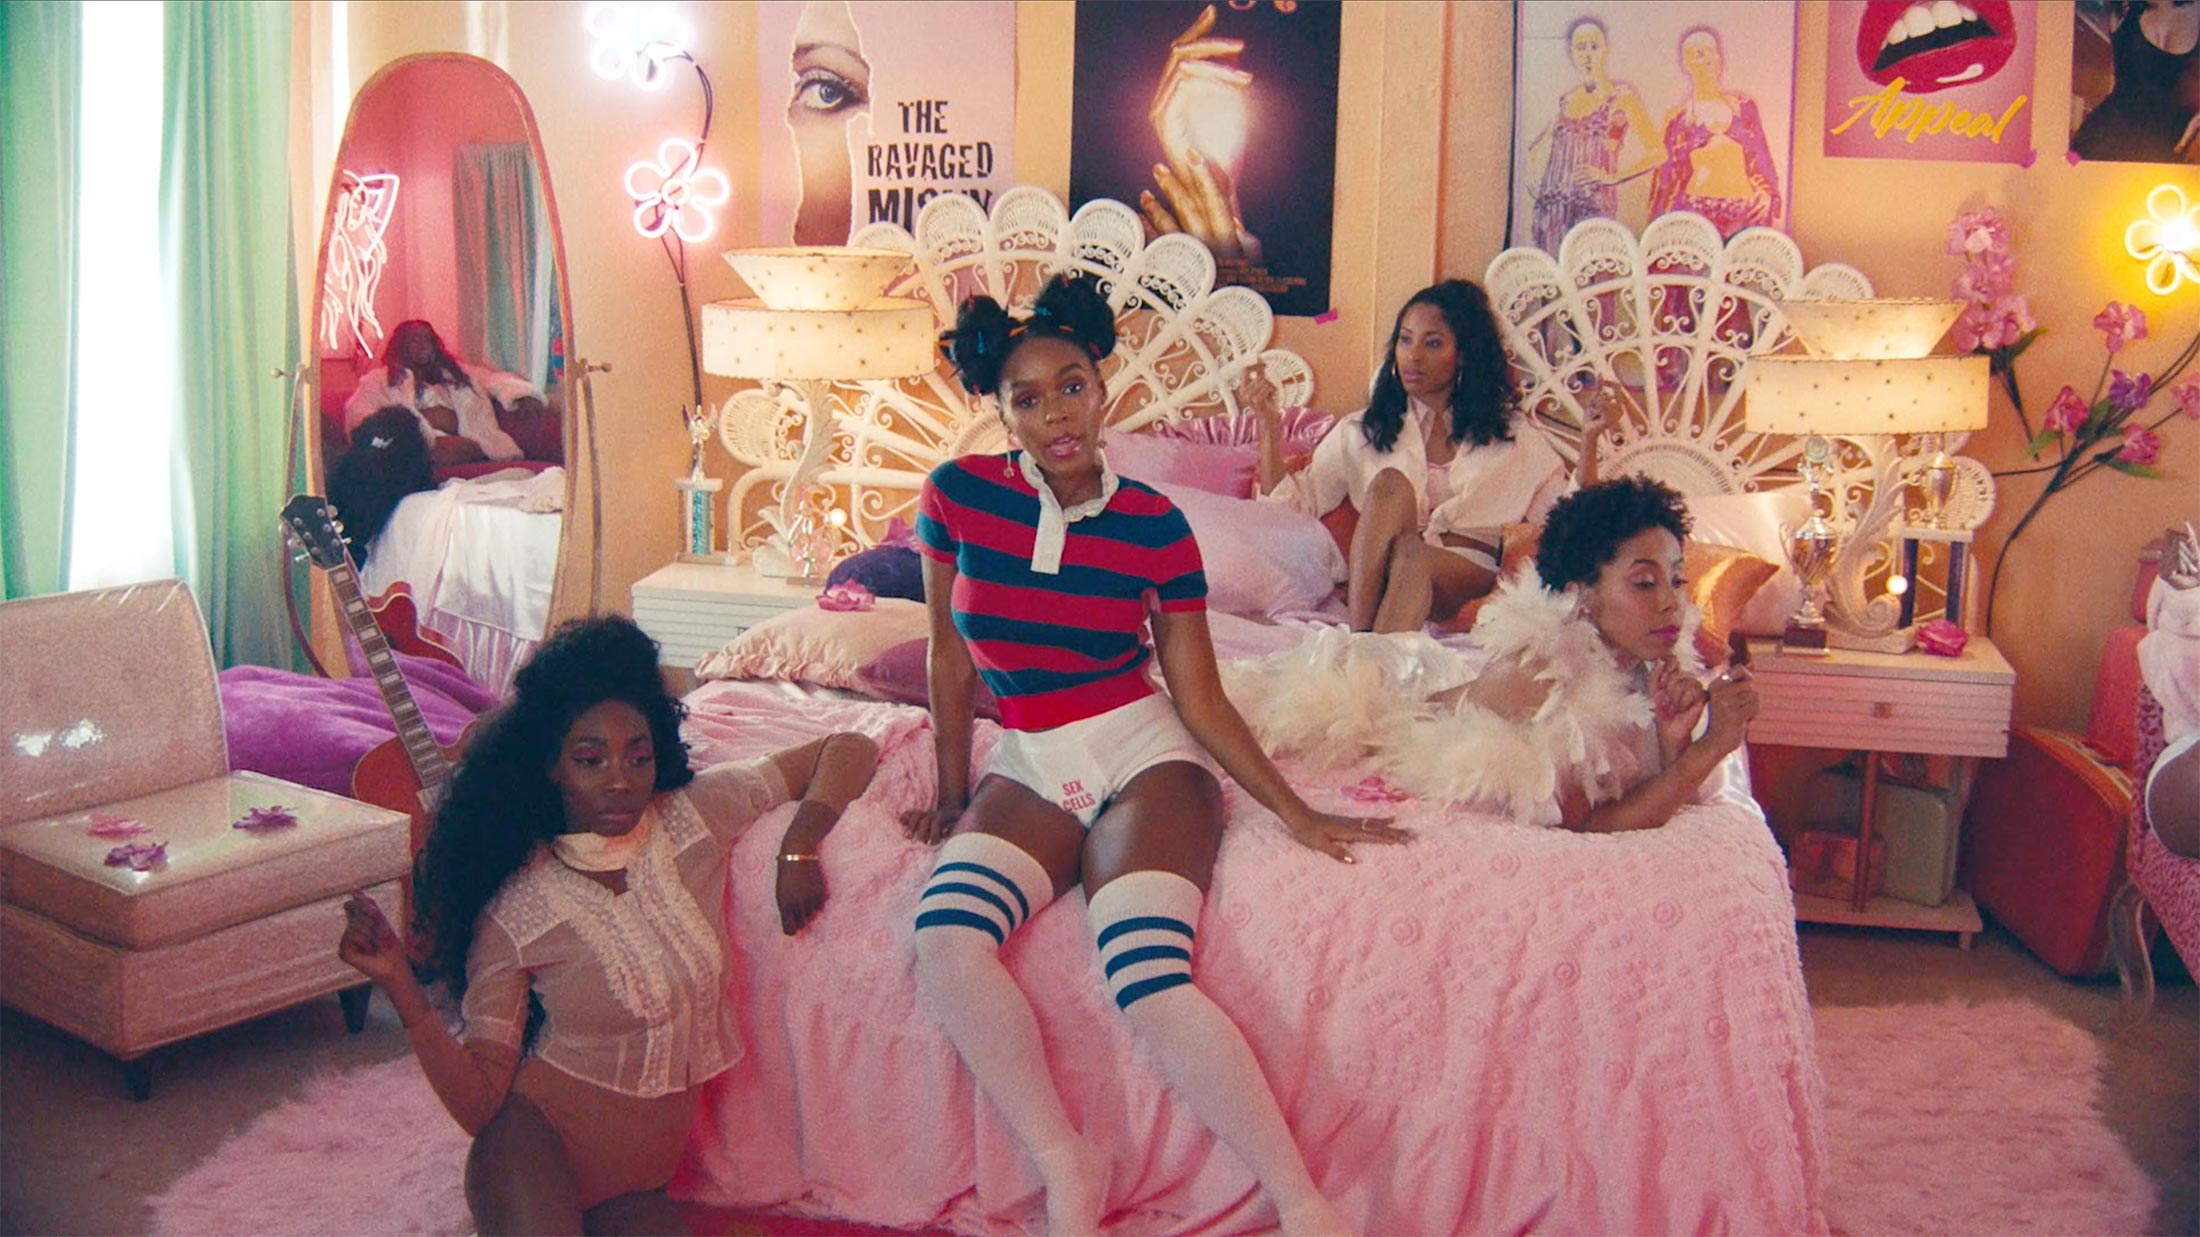 Still from Janelle Monae's Pynk Music Video